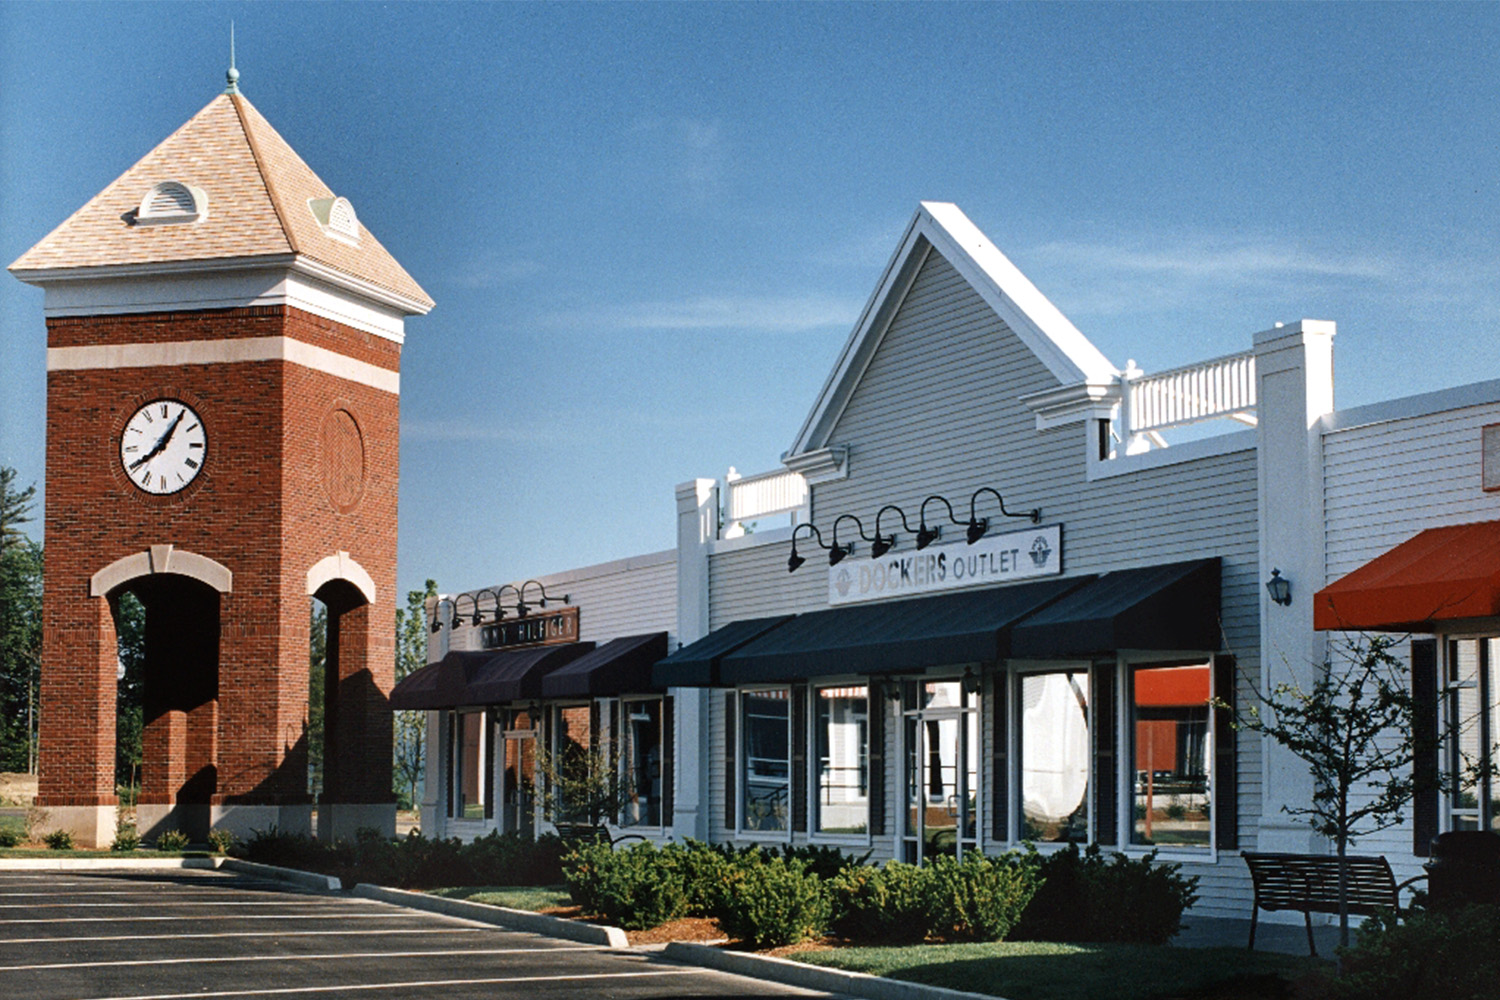 Exterior of "Dockers Outlet" store, next to tall redbrick clock tower